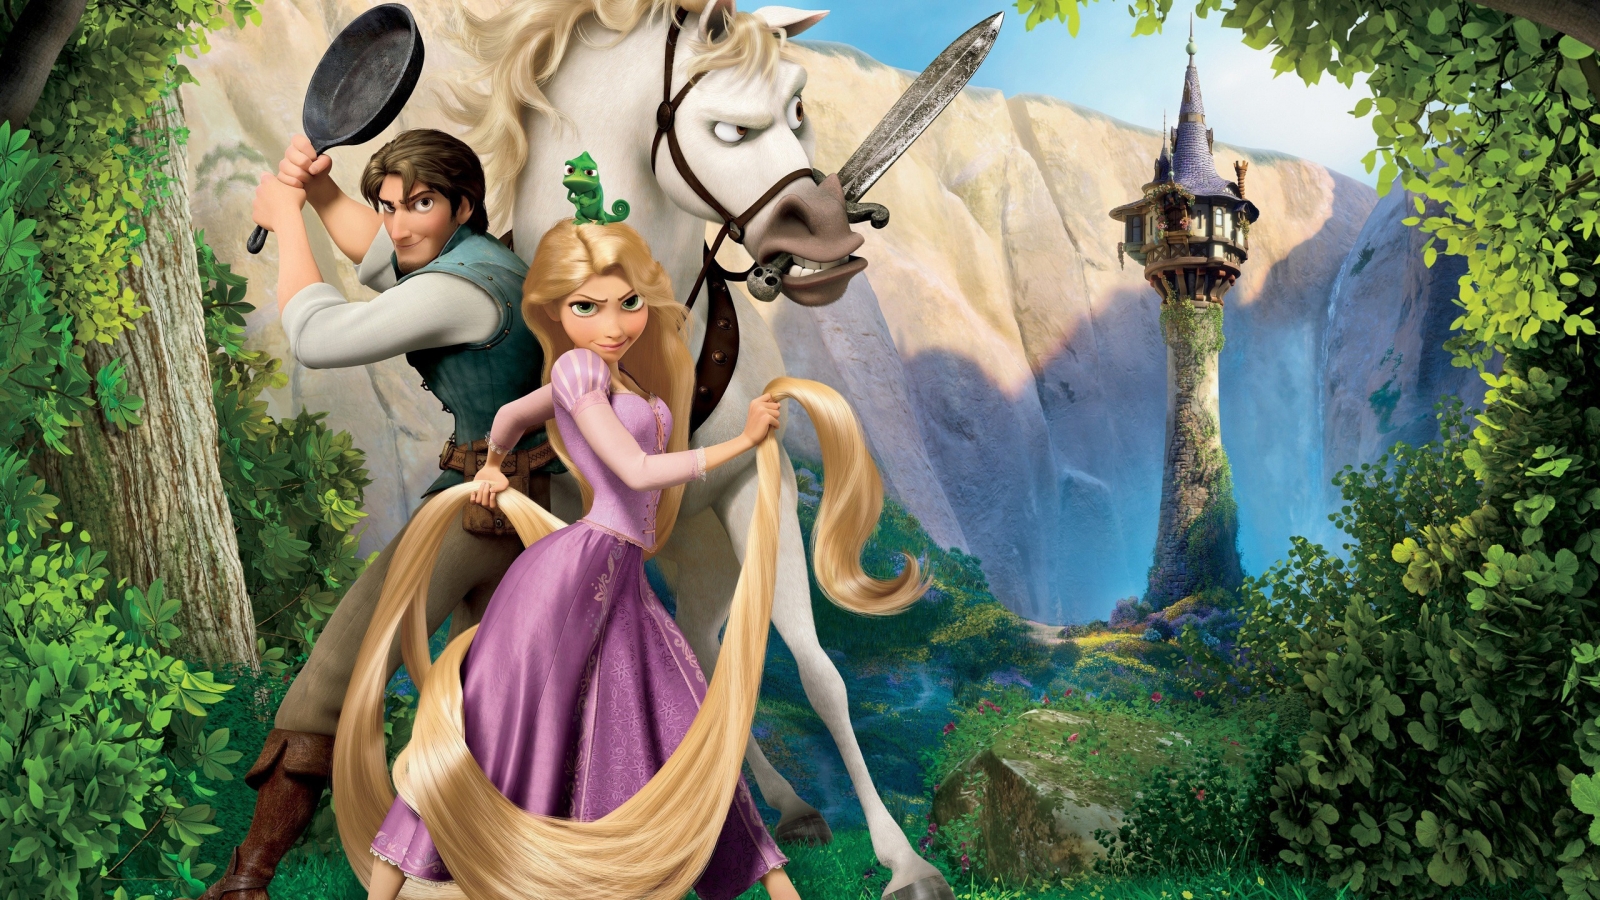 Tangled Animated Musical Film for 1600 x 900 HDTV resolution